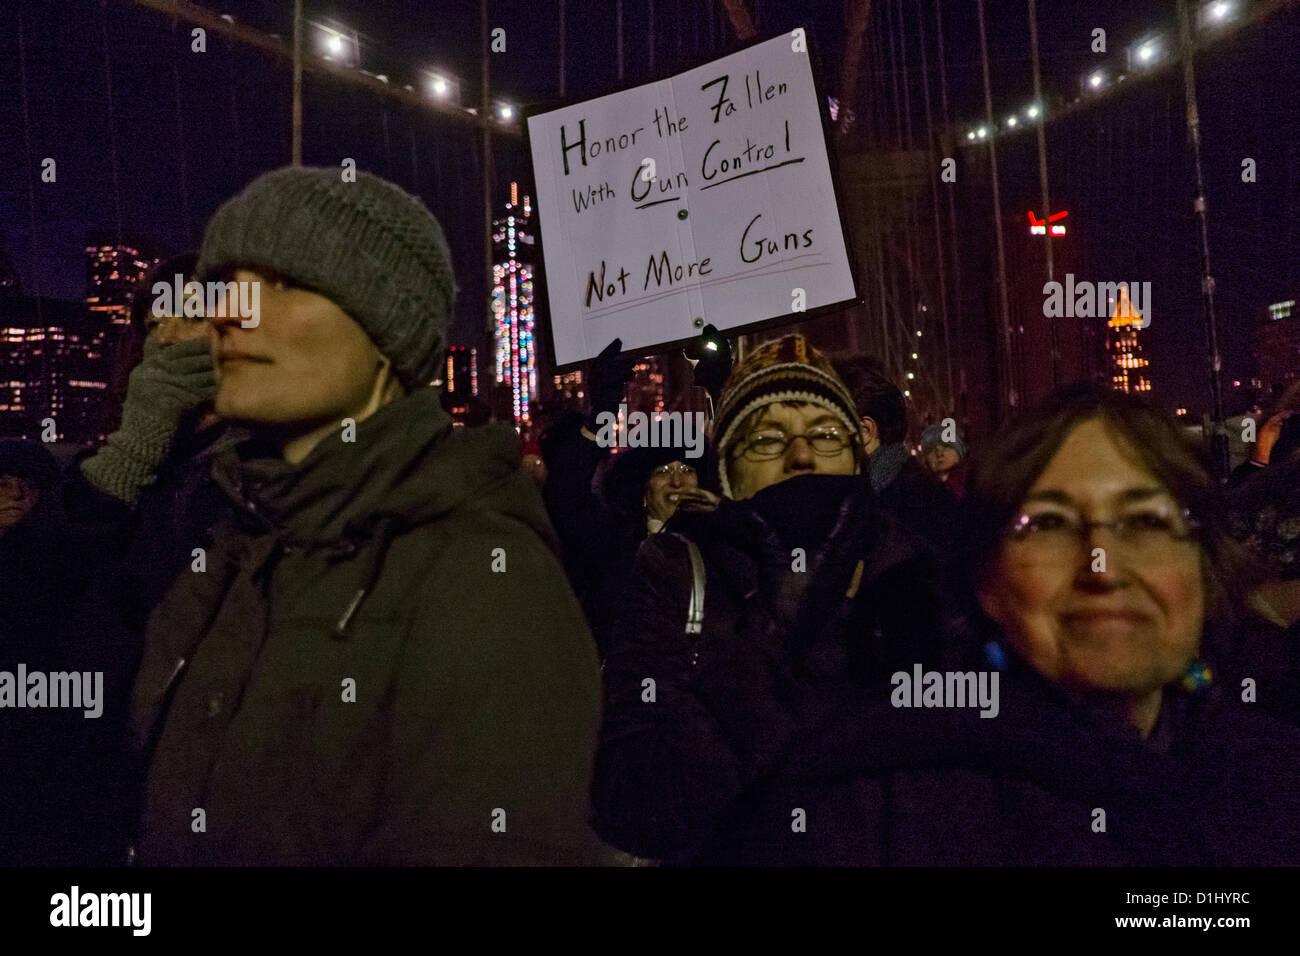 December 23, 2012, New York, NY, US. A man holds a sign reading 'Honor the fallen with gun control not more guns' during rally on the Brooklyn Bridge, nine days after the shooting rampage at Sandy Hook Elemetary School in nearby Newtown, Connecticut Stock Photo